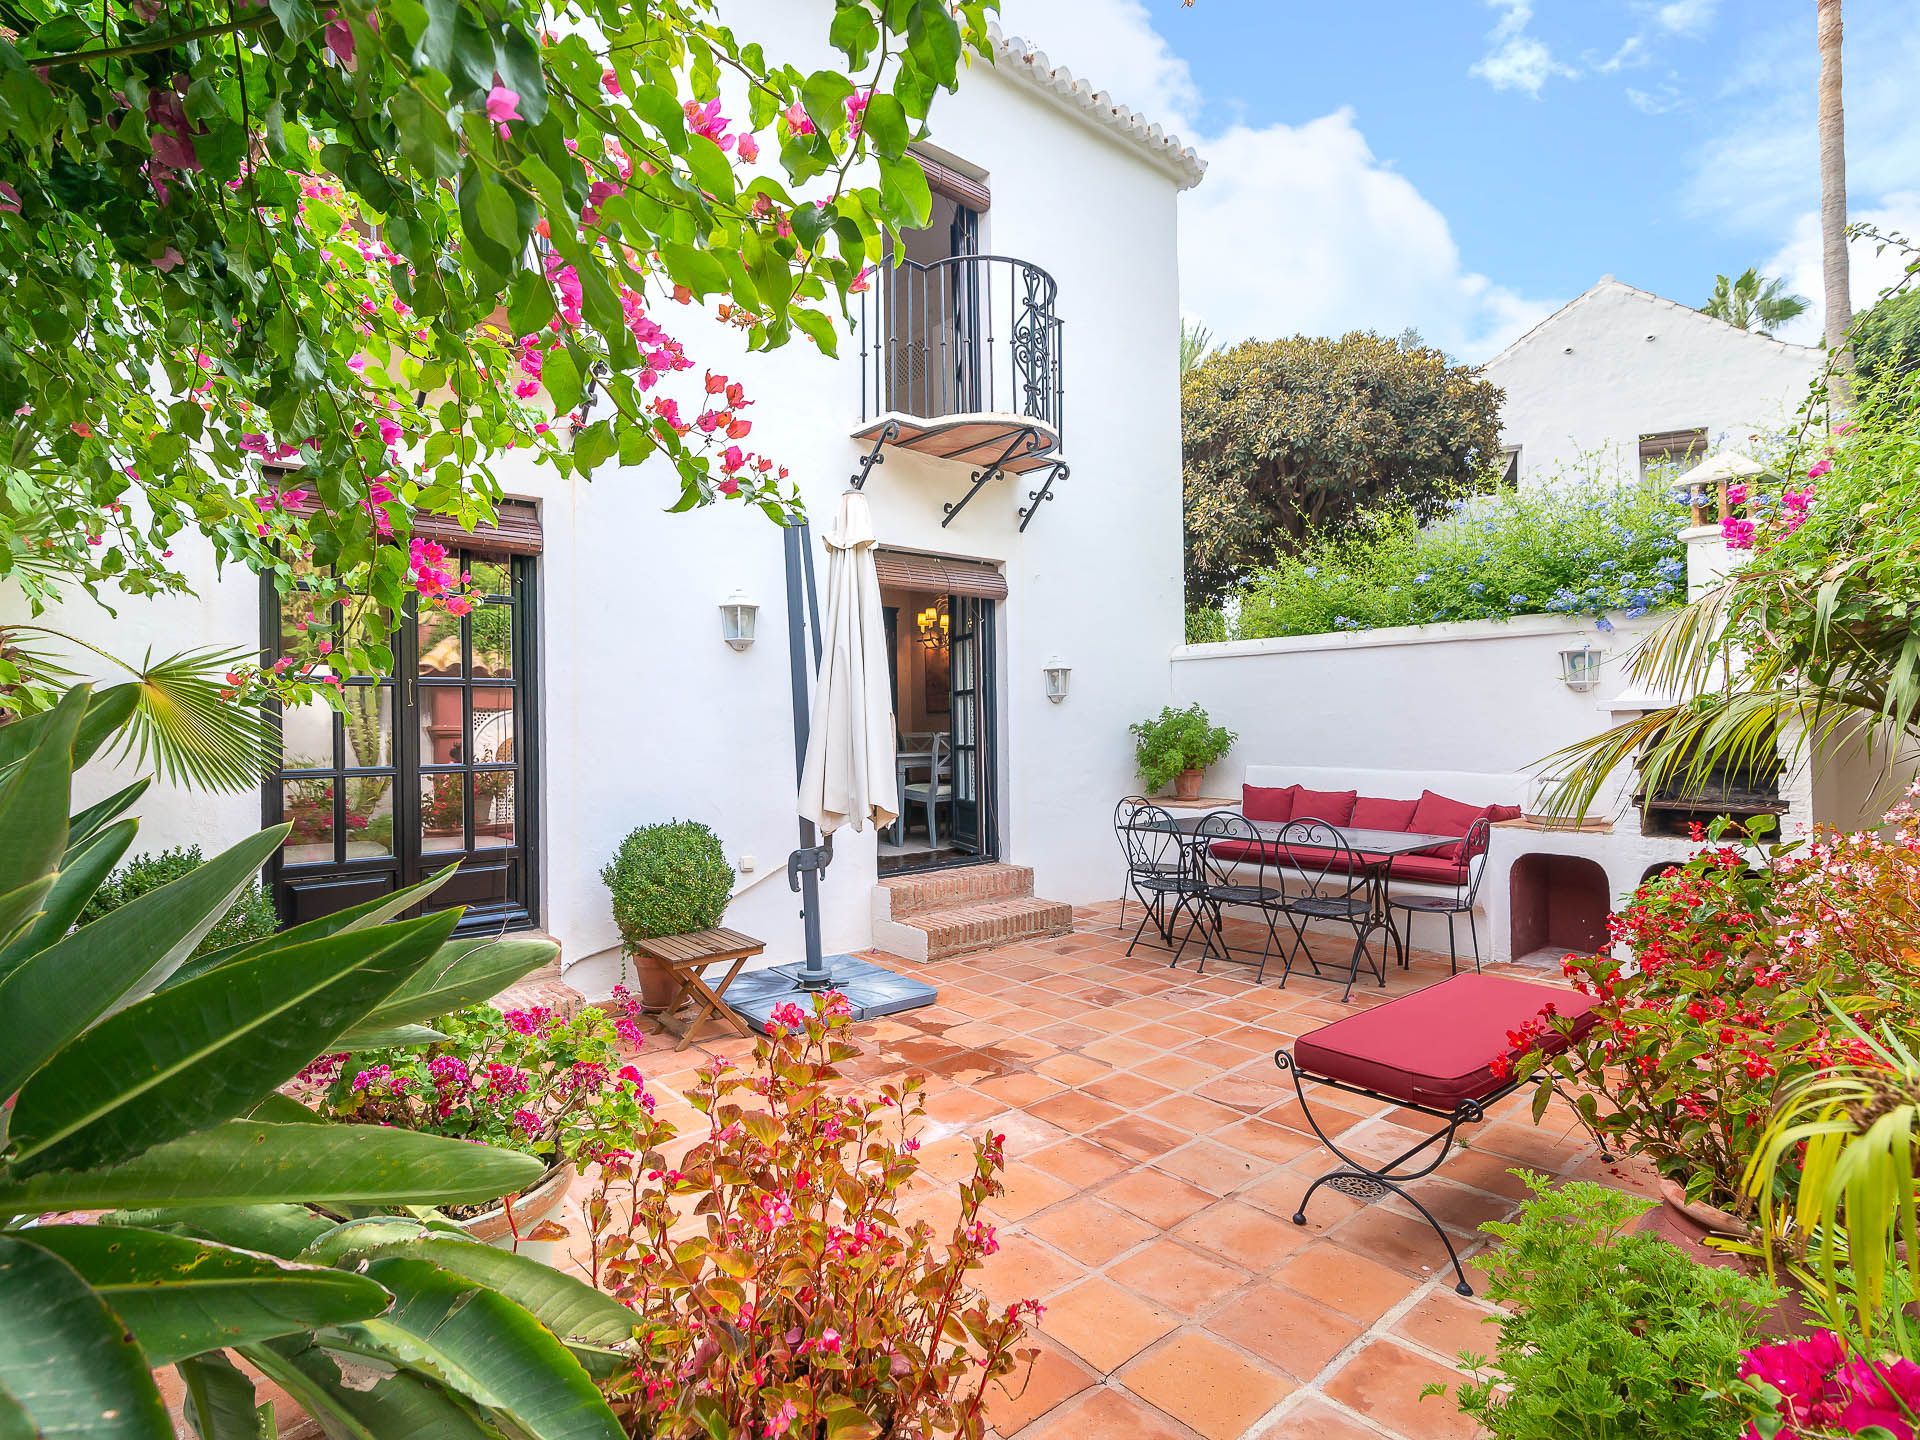 Charming Townhouse with Lovely Outdoor Space | Engel & Völkers Marbella